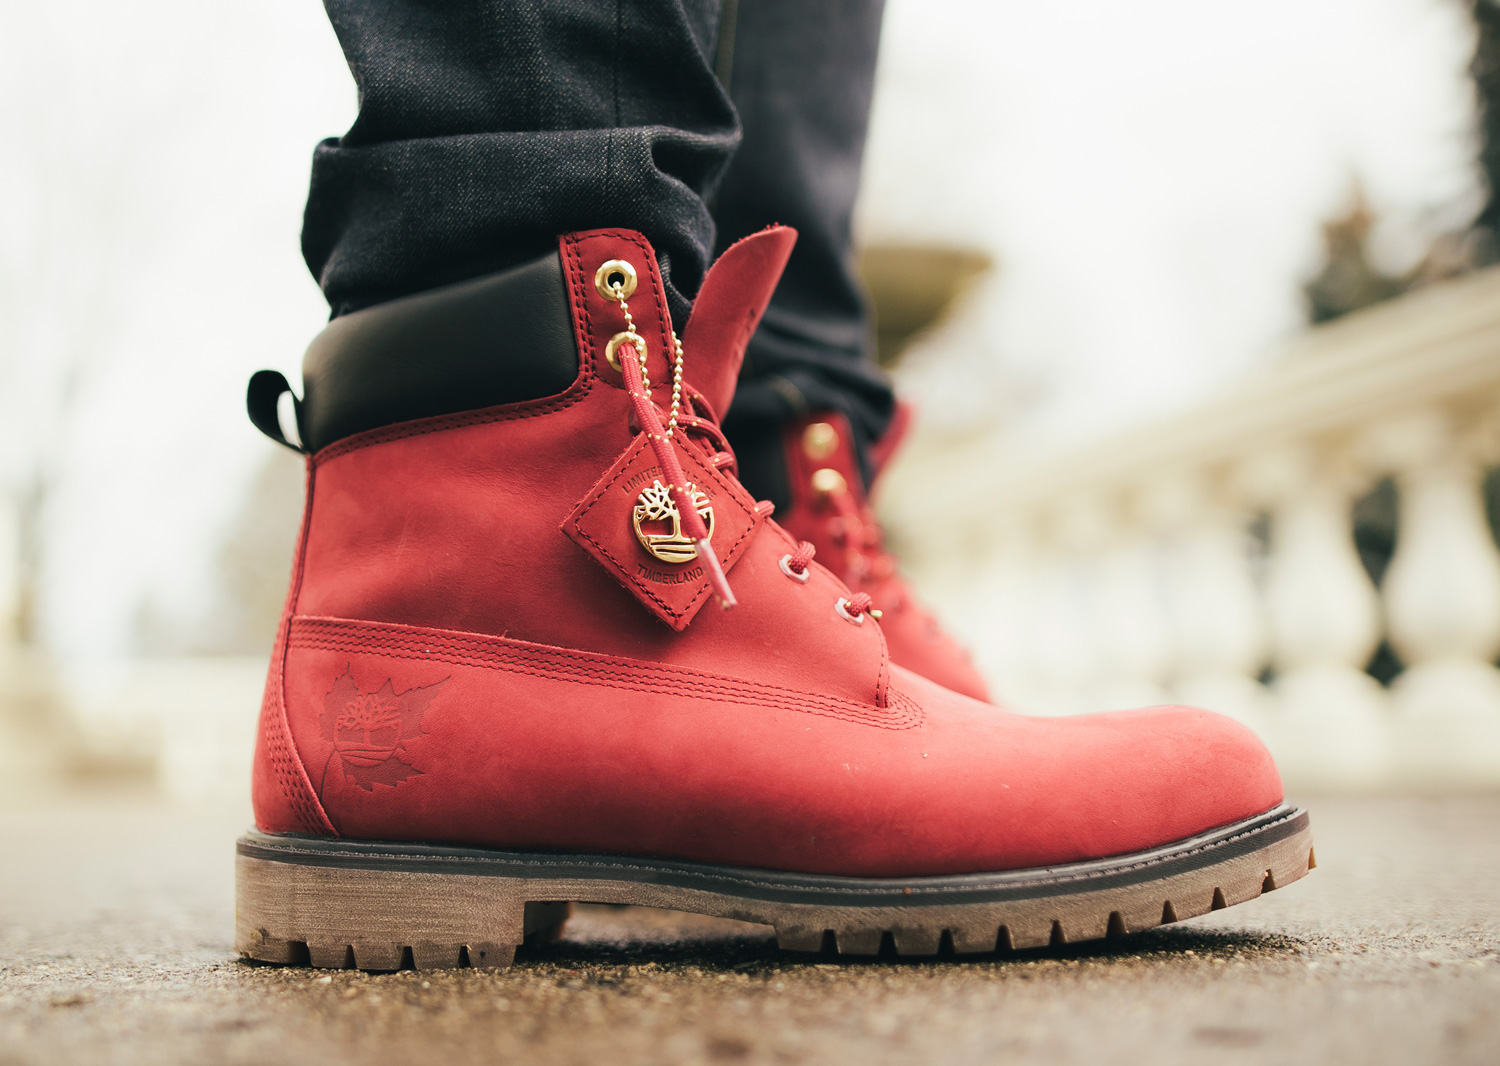 Timberland presents the Red 6